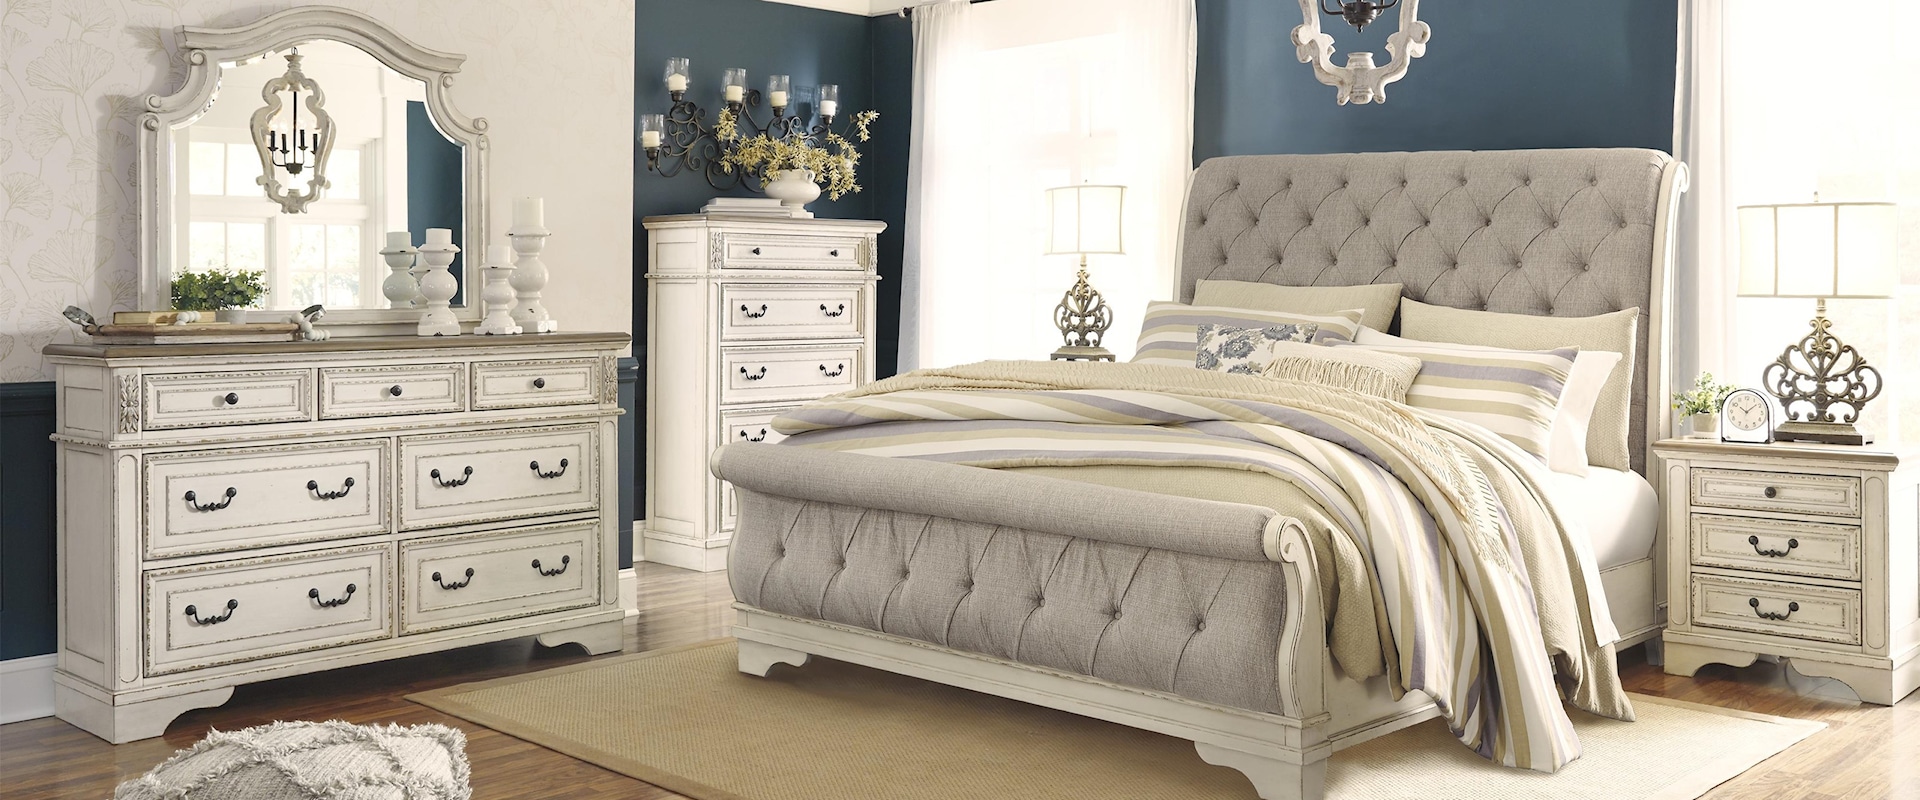 Queen Upholstered Sleigh Bed, Dresser, Mirror, Nightstand and Chest